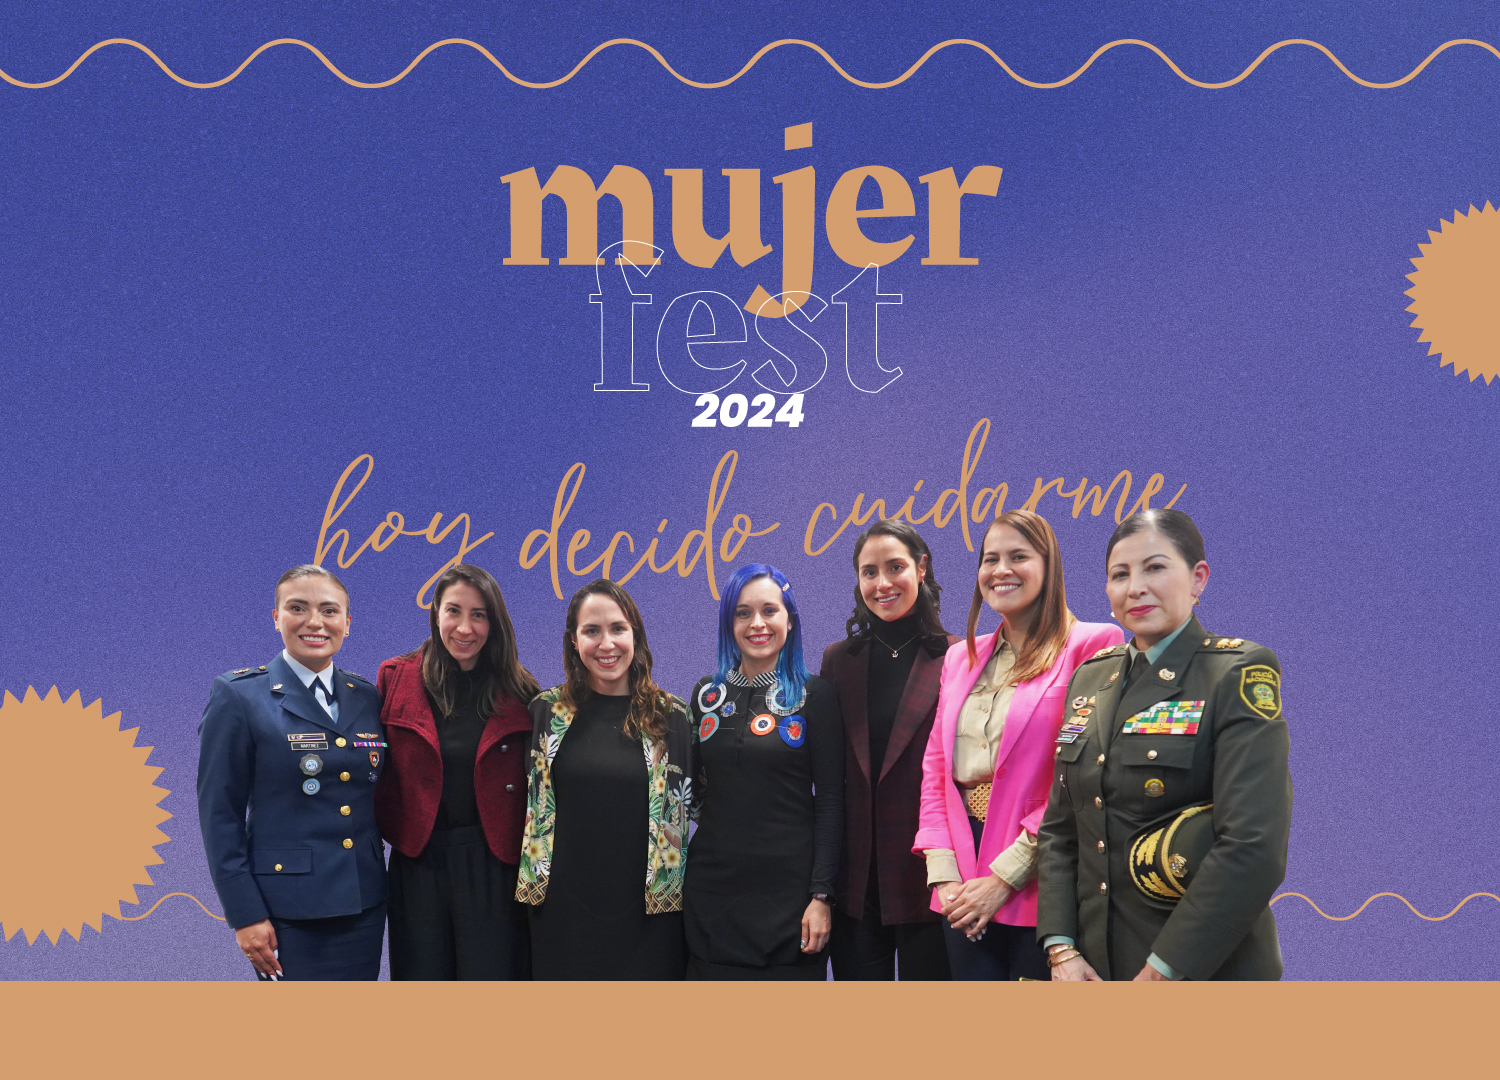 Mujer FEST 2024